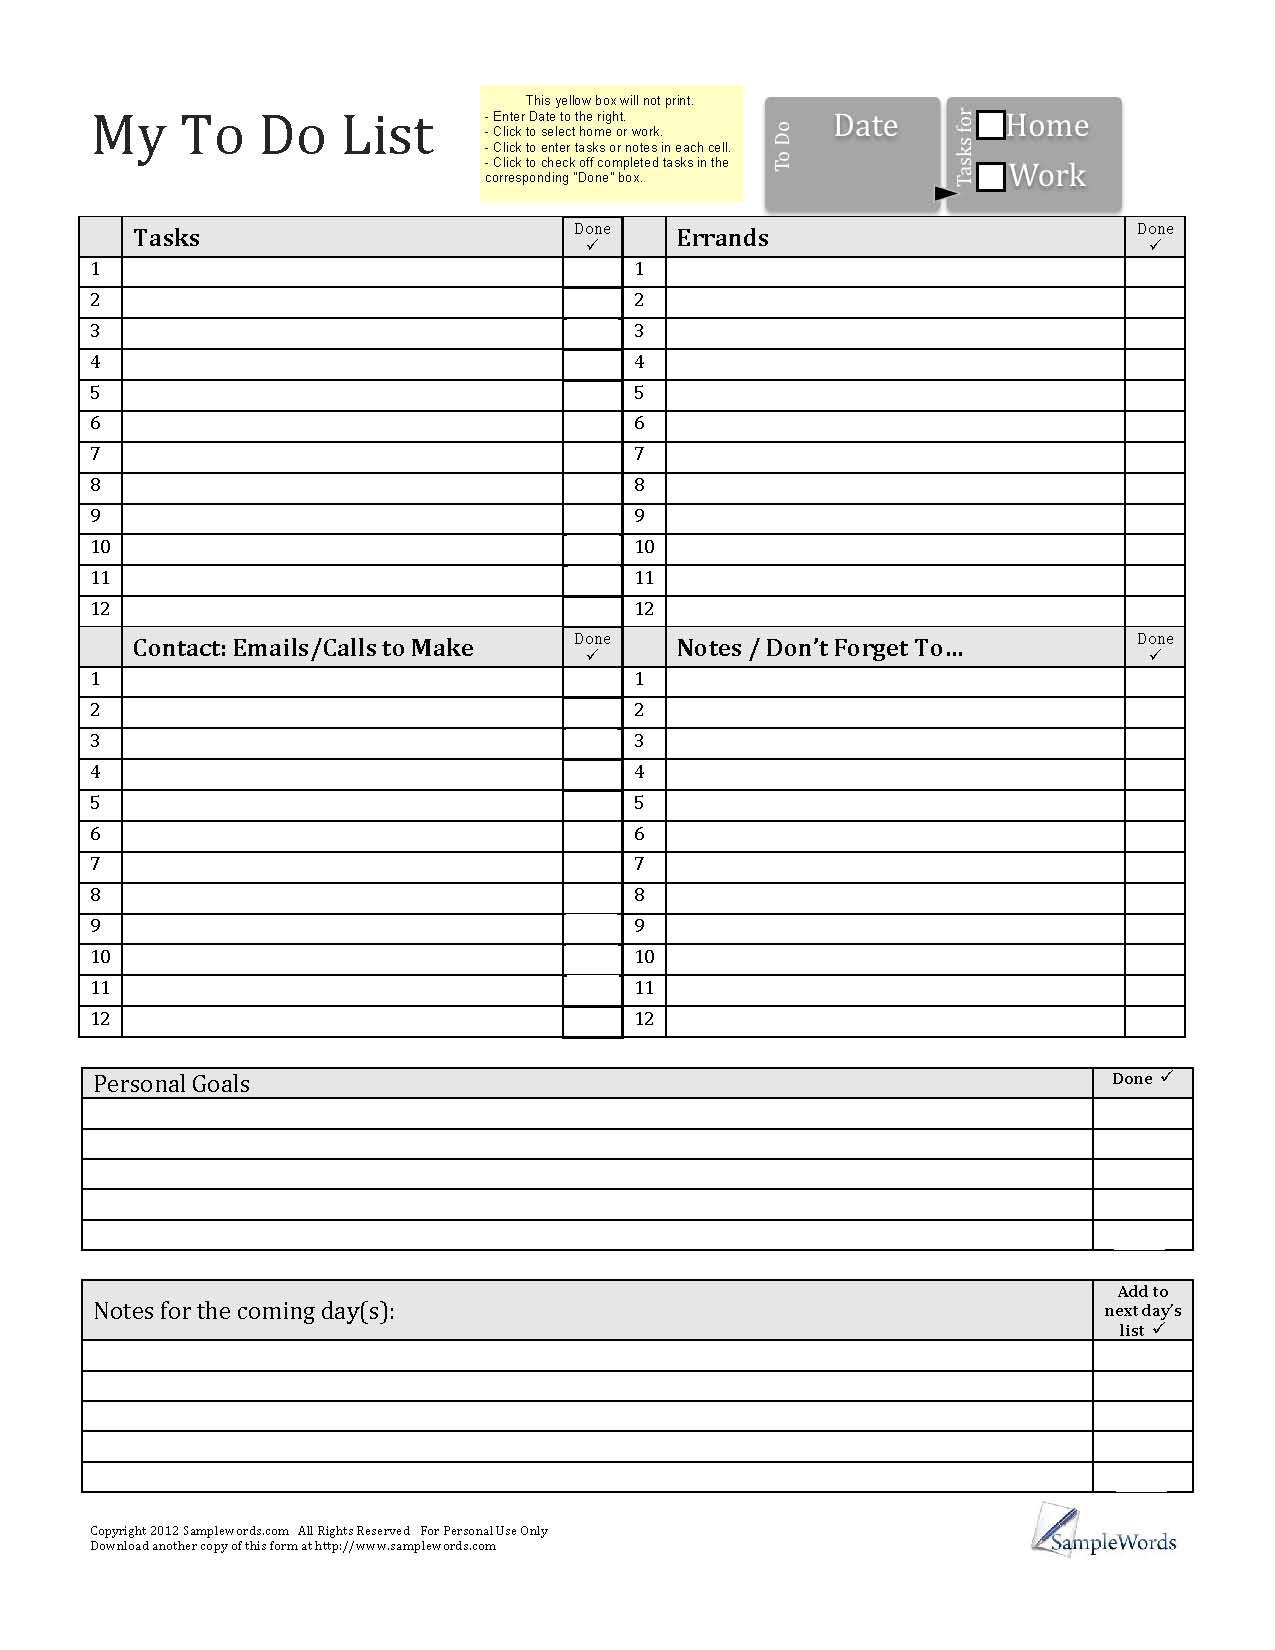 Pdf list Forms and